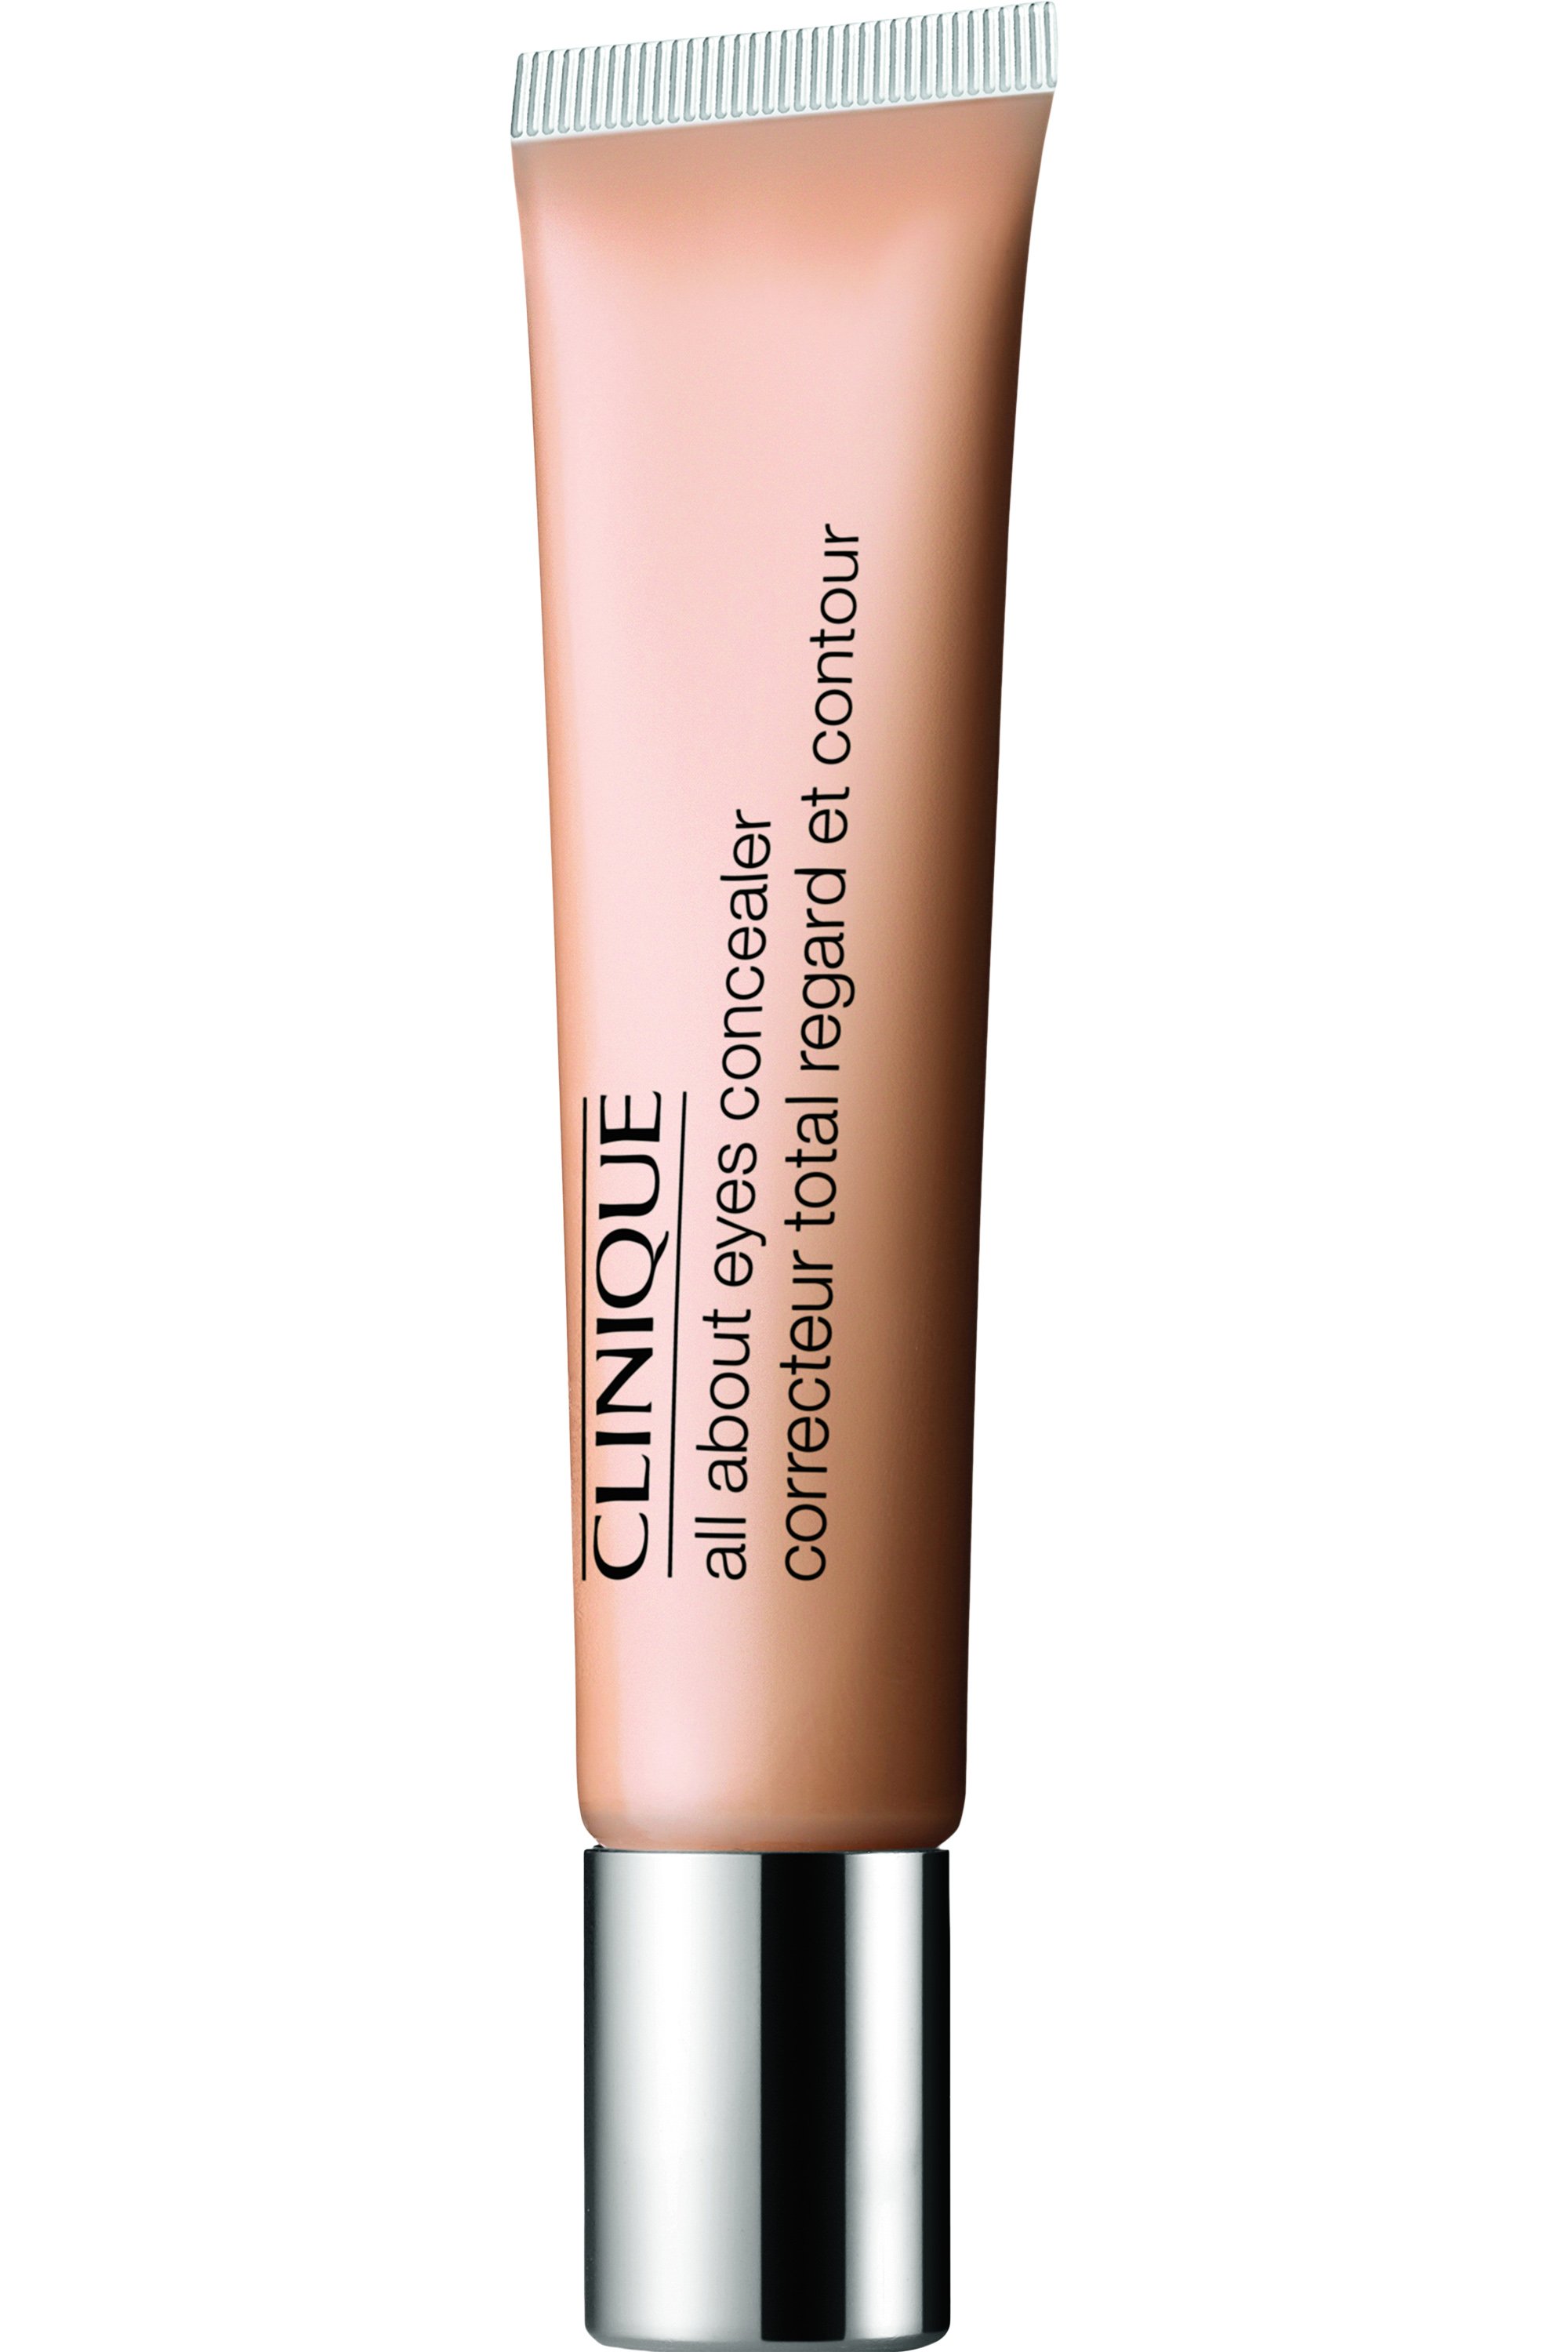 Buy Clinique - All About Eyes - Medium